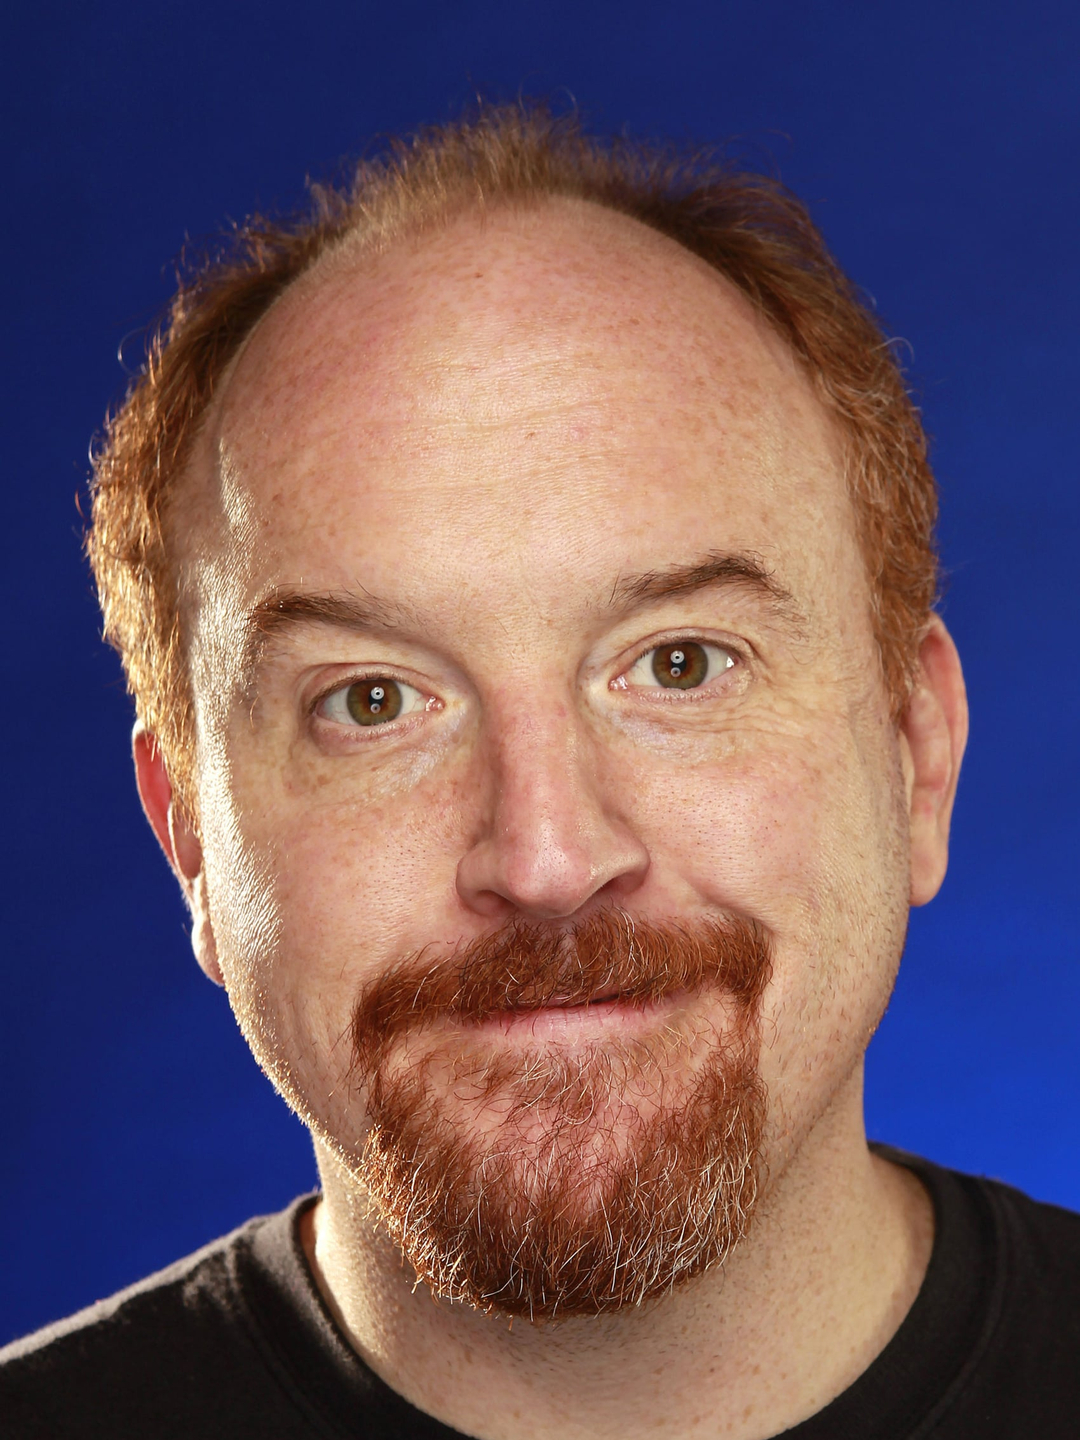 Louis C.K. early life